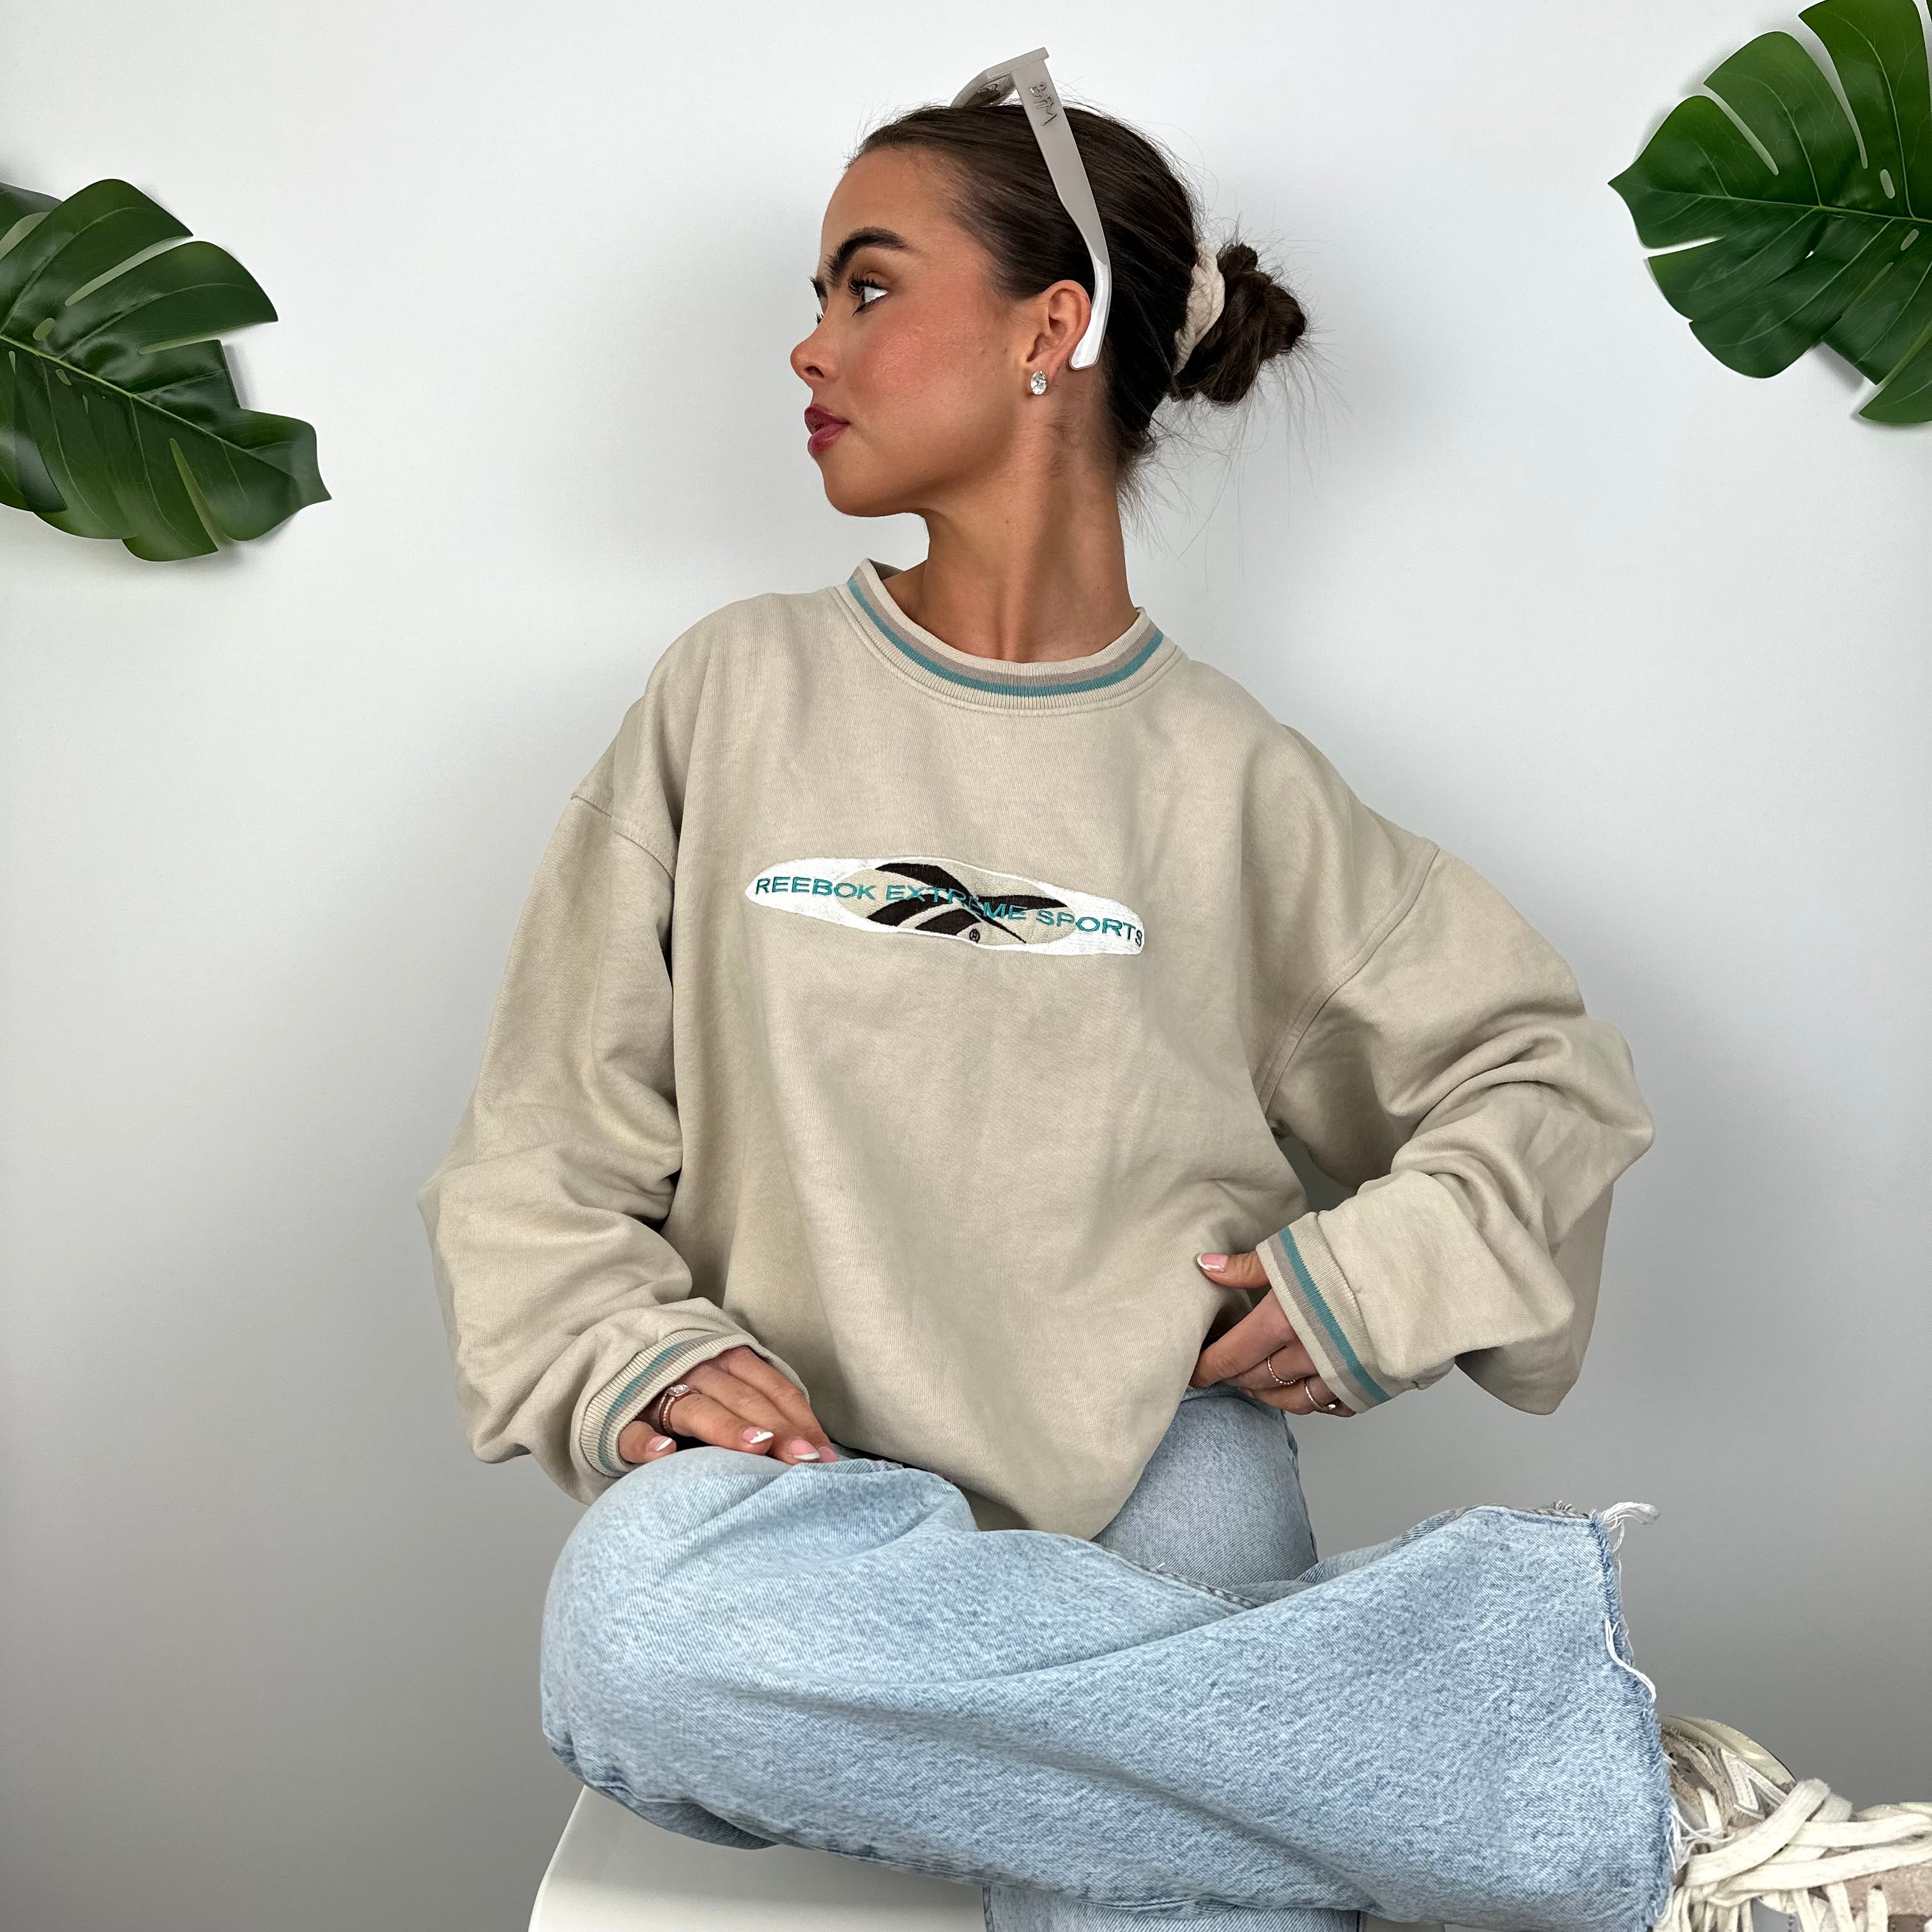 Reebok Tan Beige Embroidered Spell Out Sweatshirt (M)